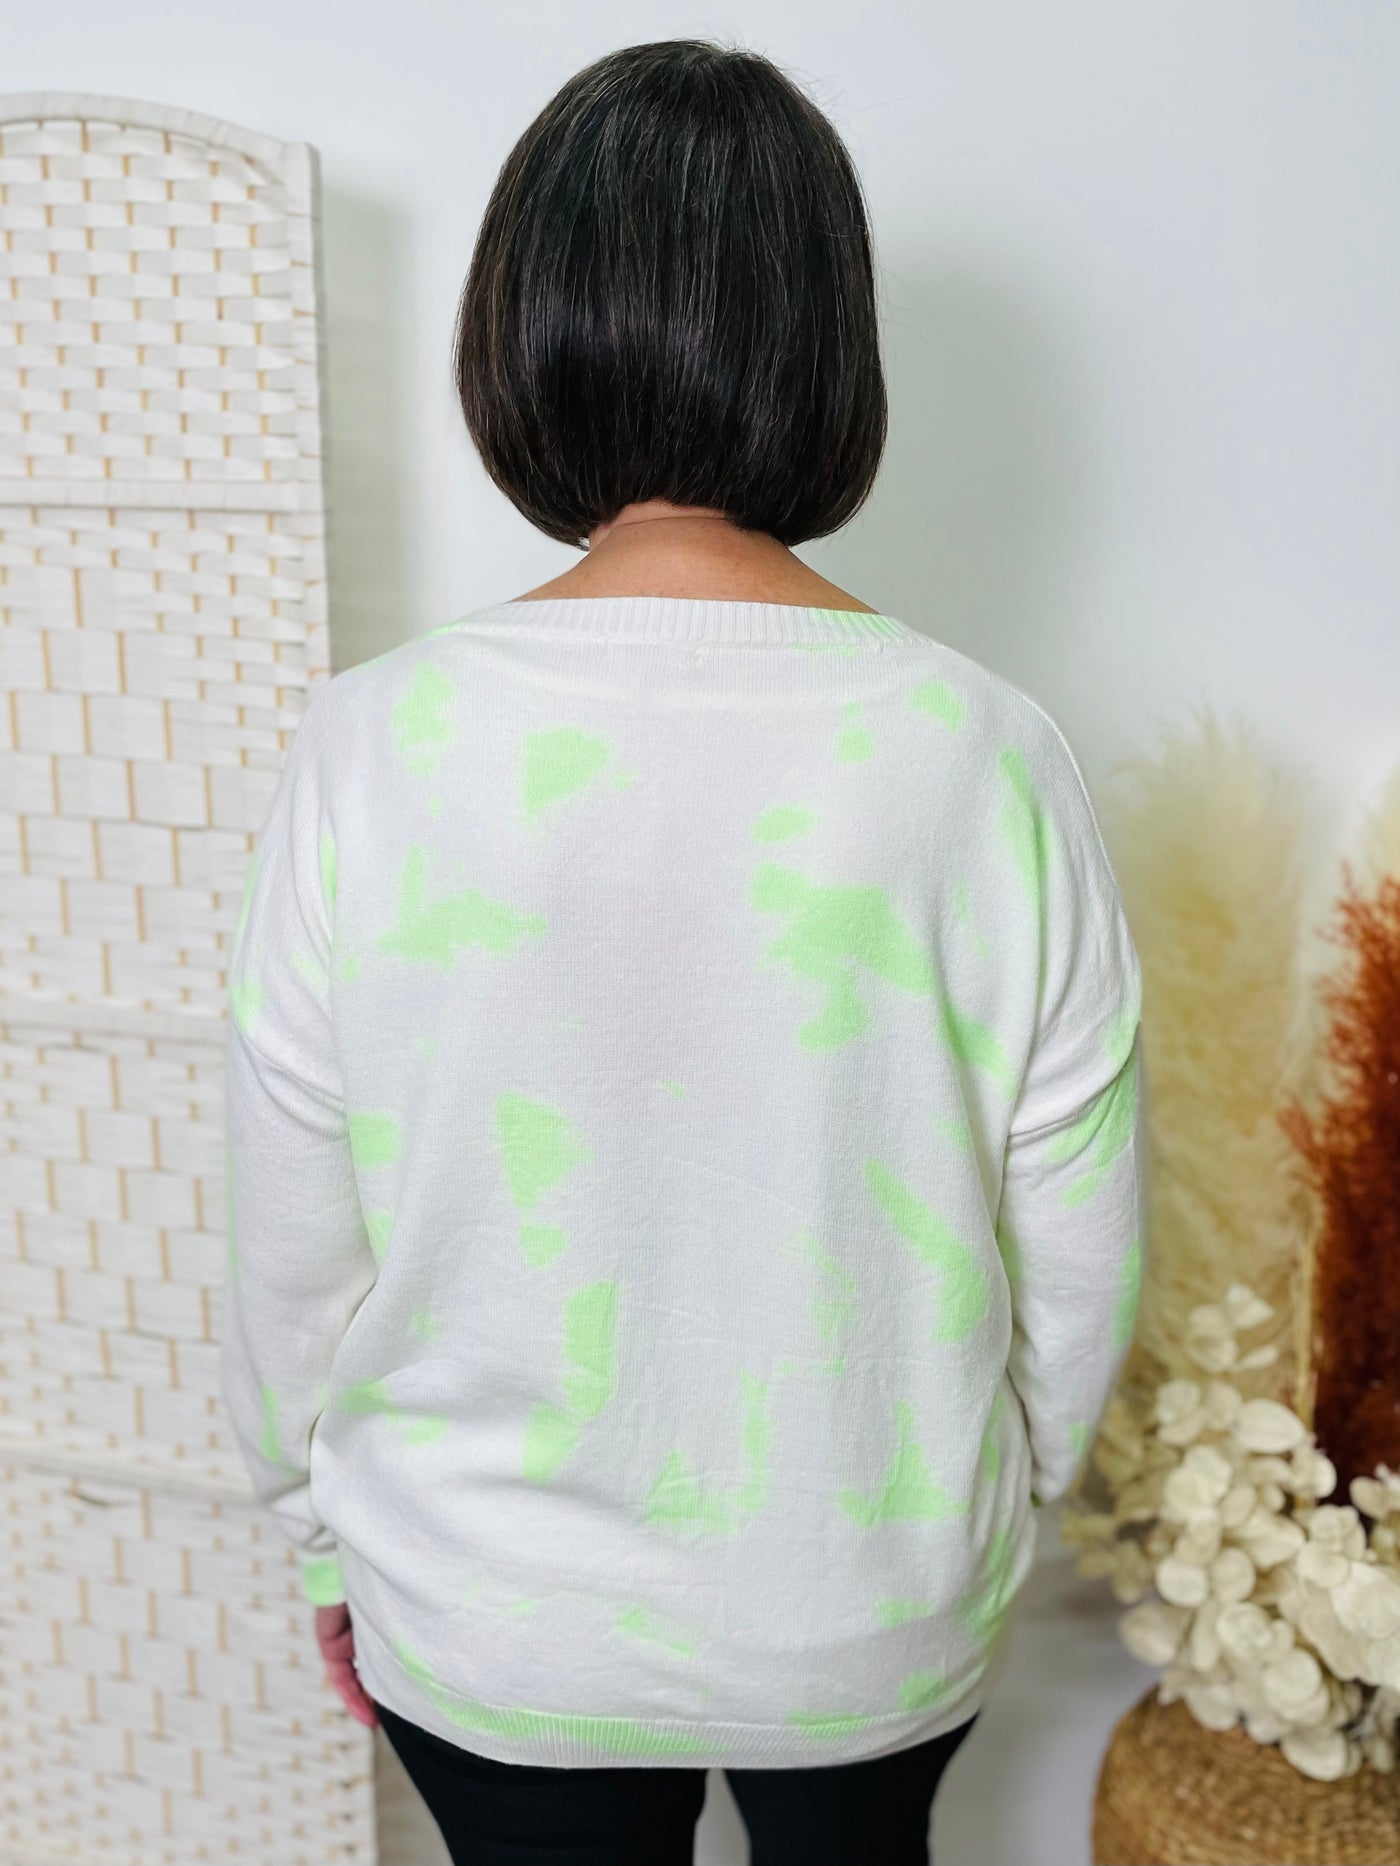 "SNOOPY" Fine Knit Top-White & Green